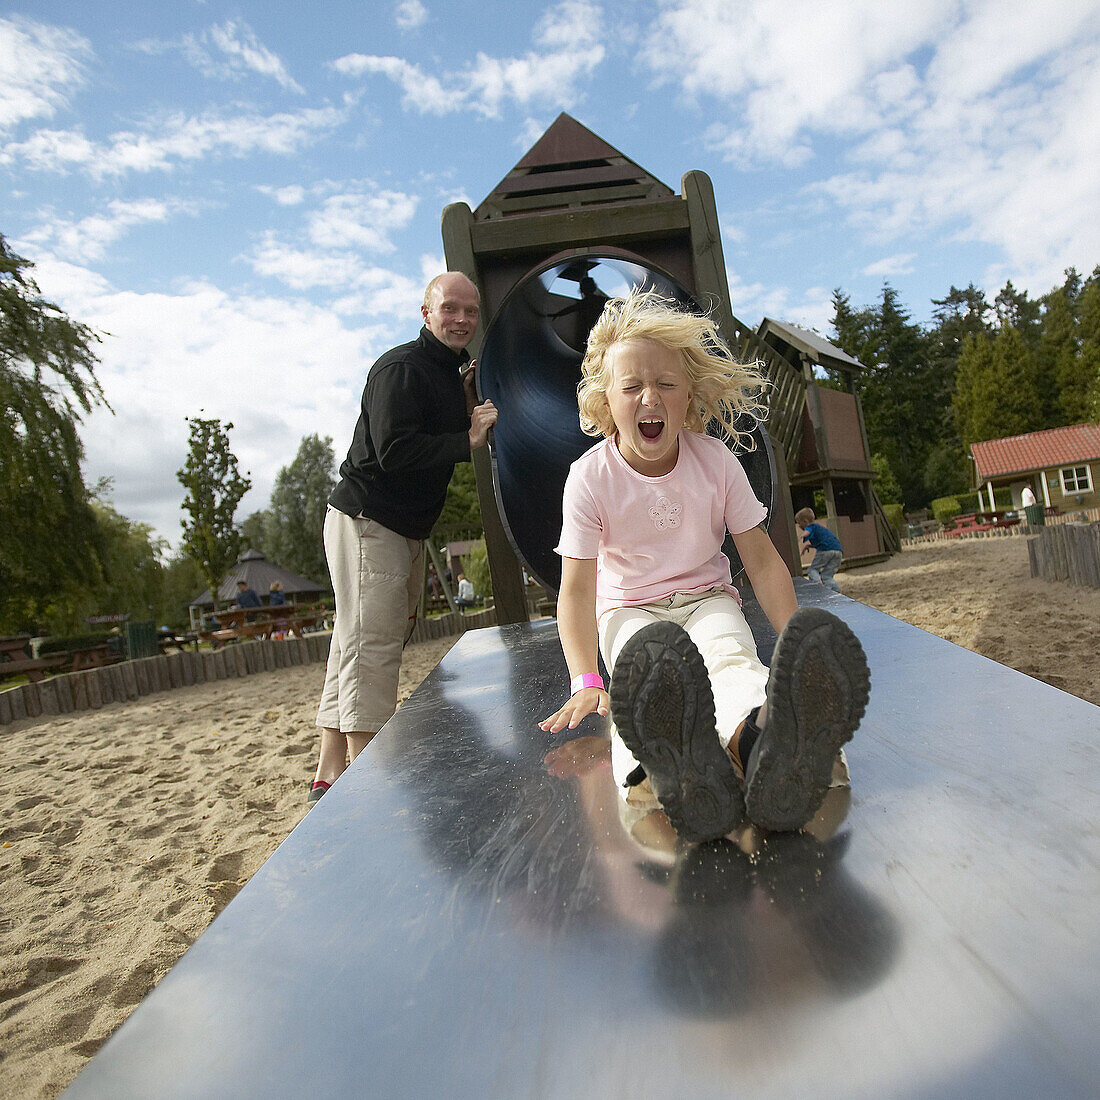 Daughter and father playing in playground. Danmark